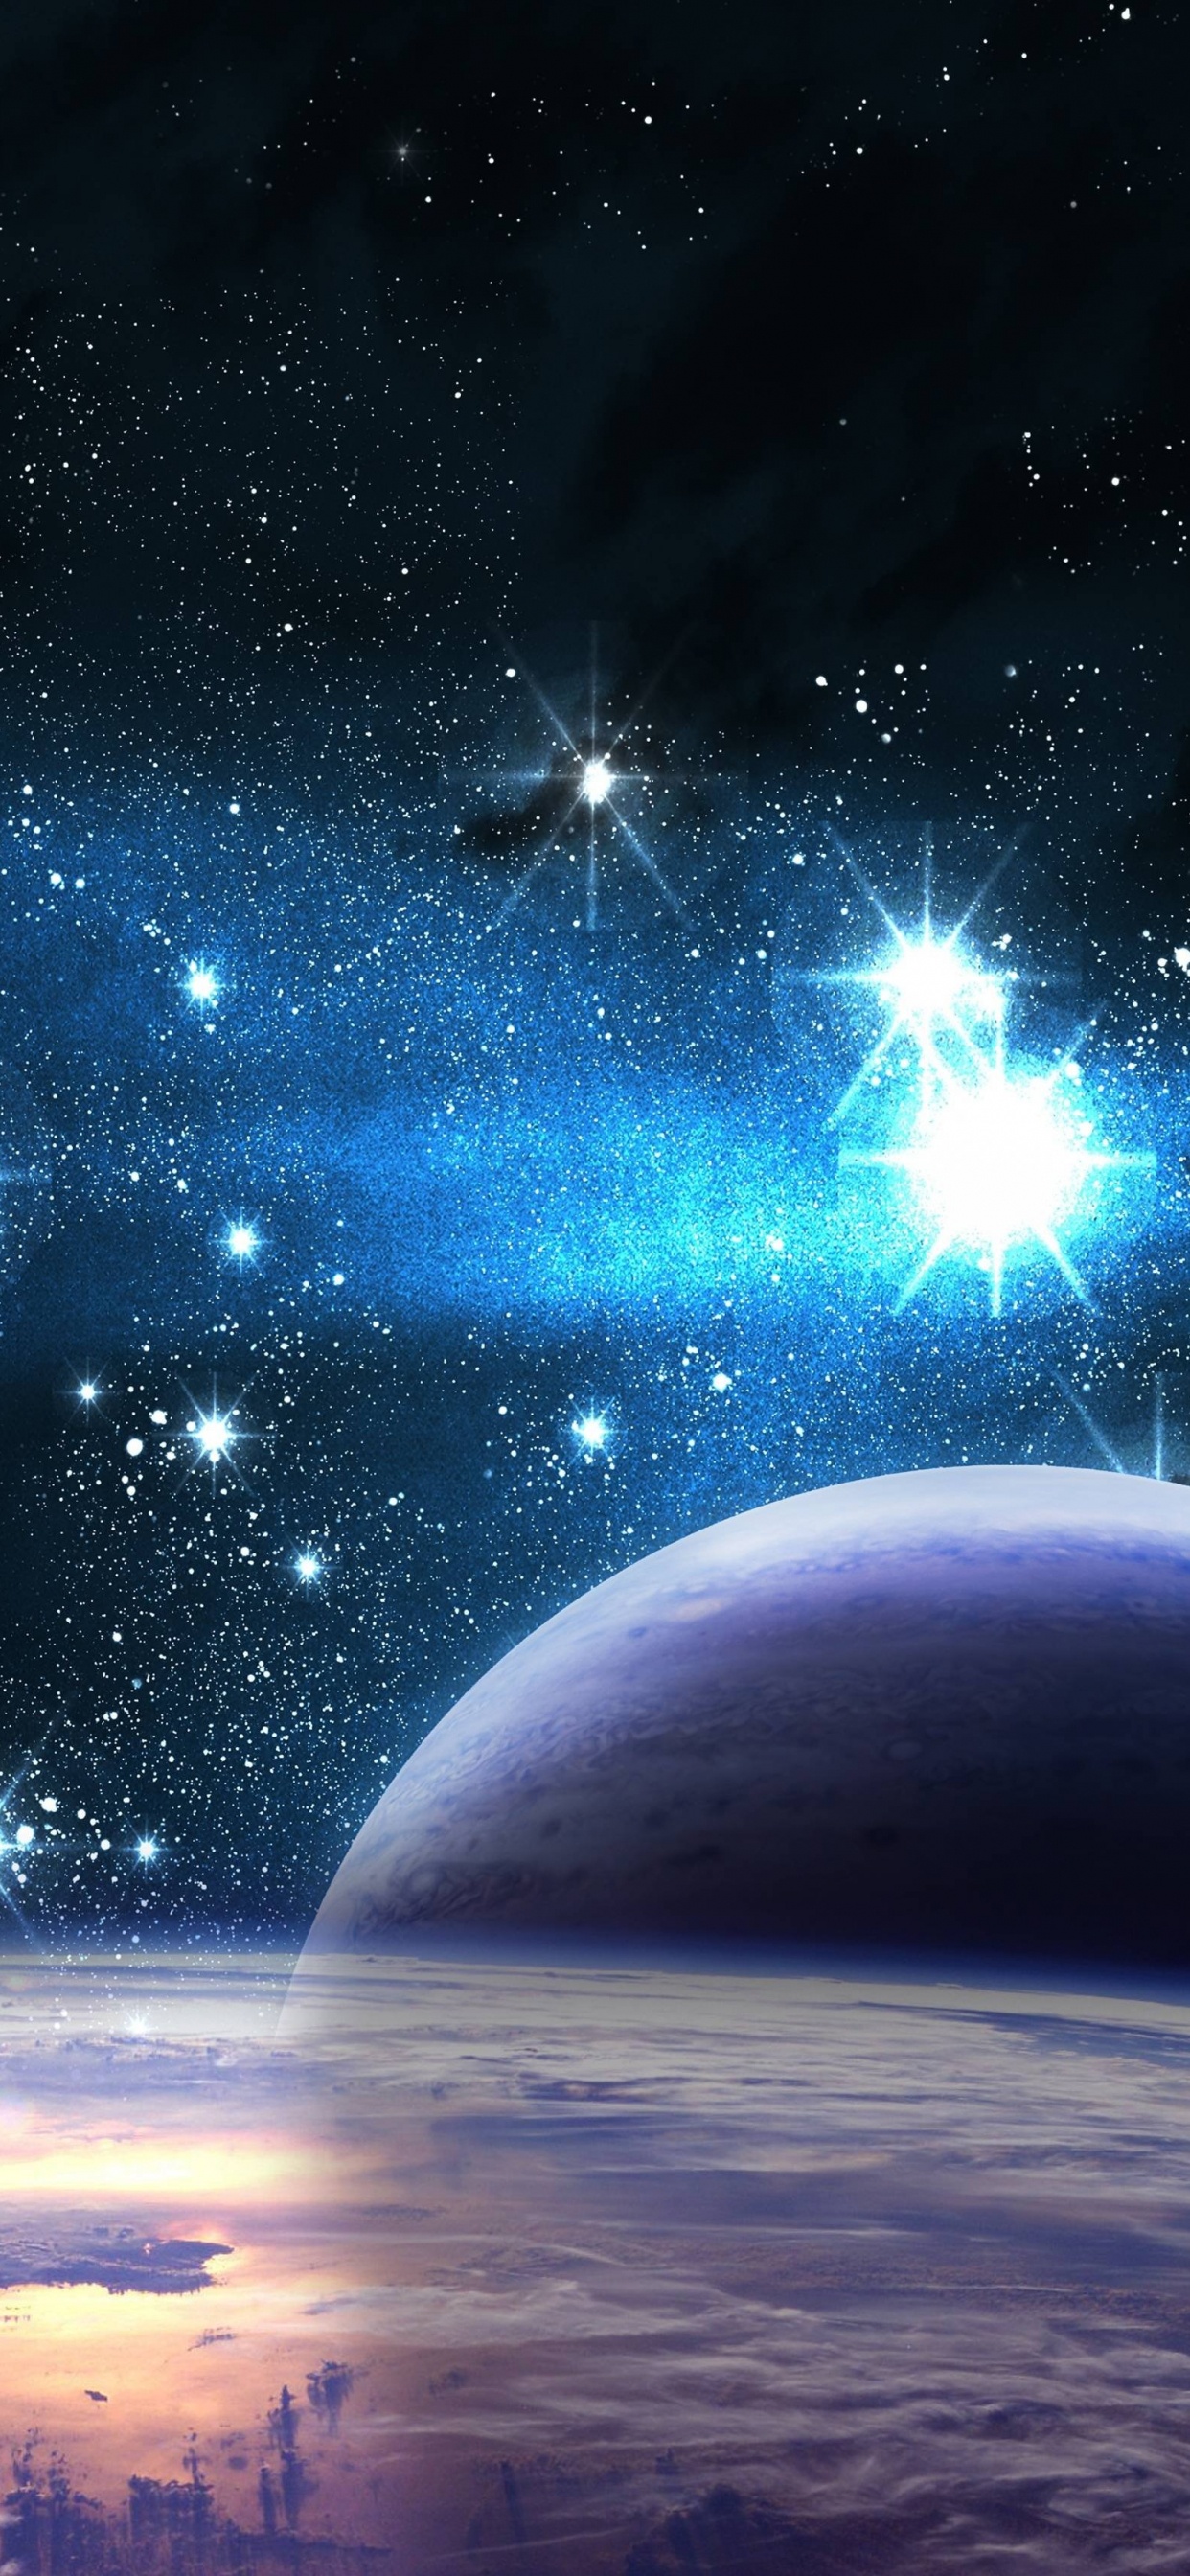 Blue and White Planet With Stars. Wallpaper in 1242x2688 Resolution